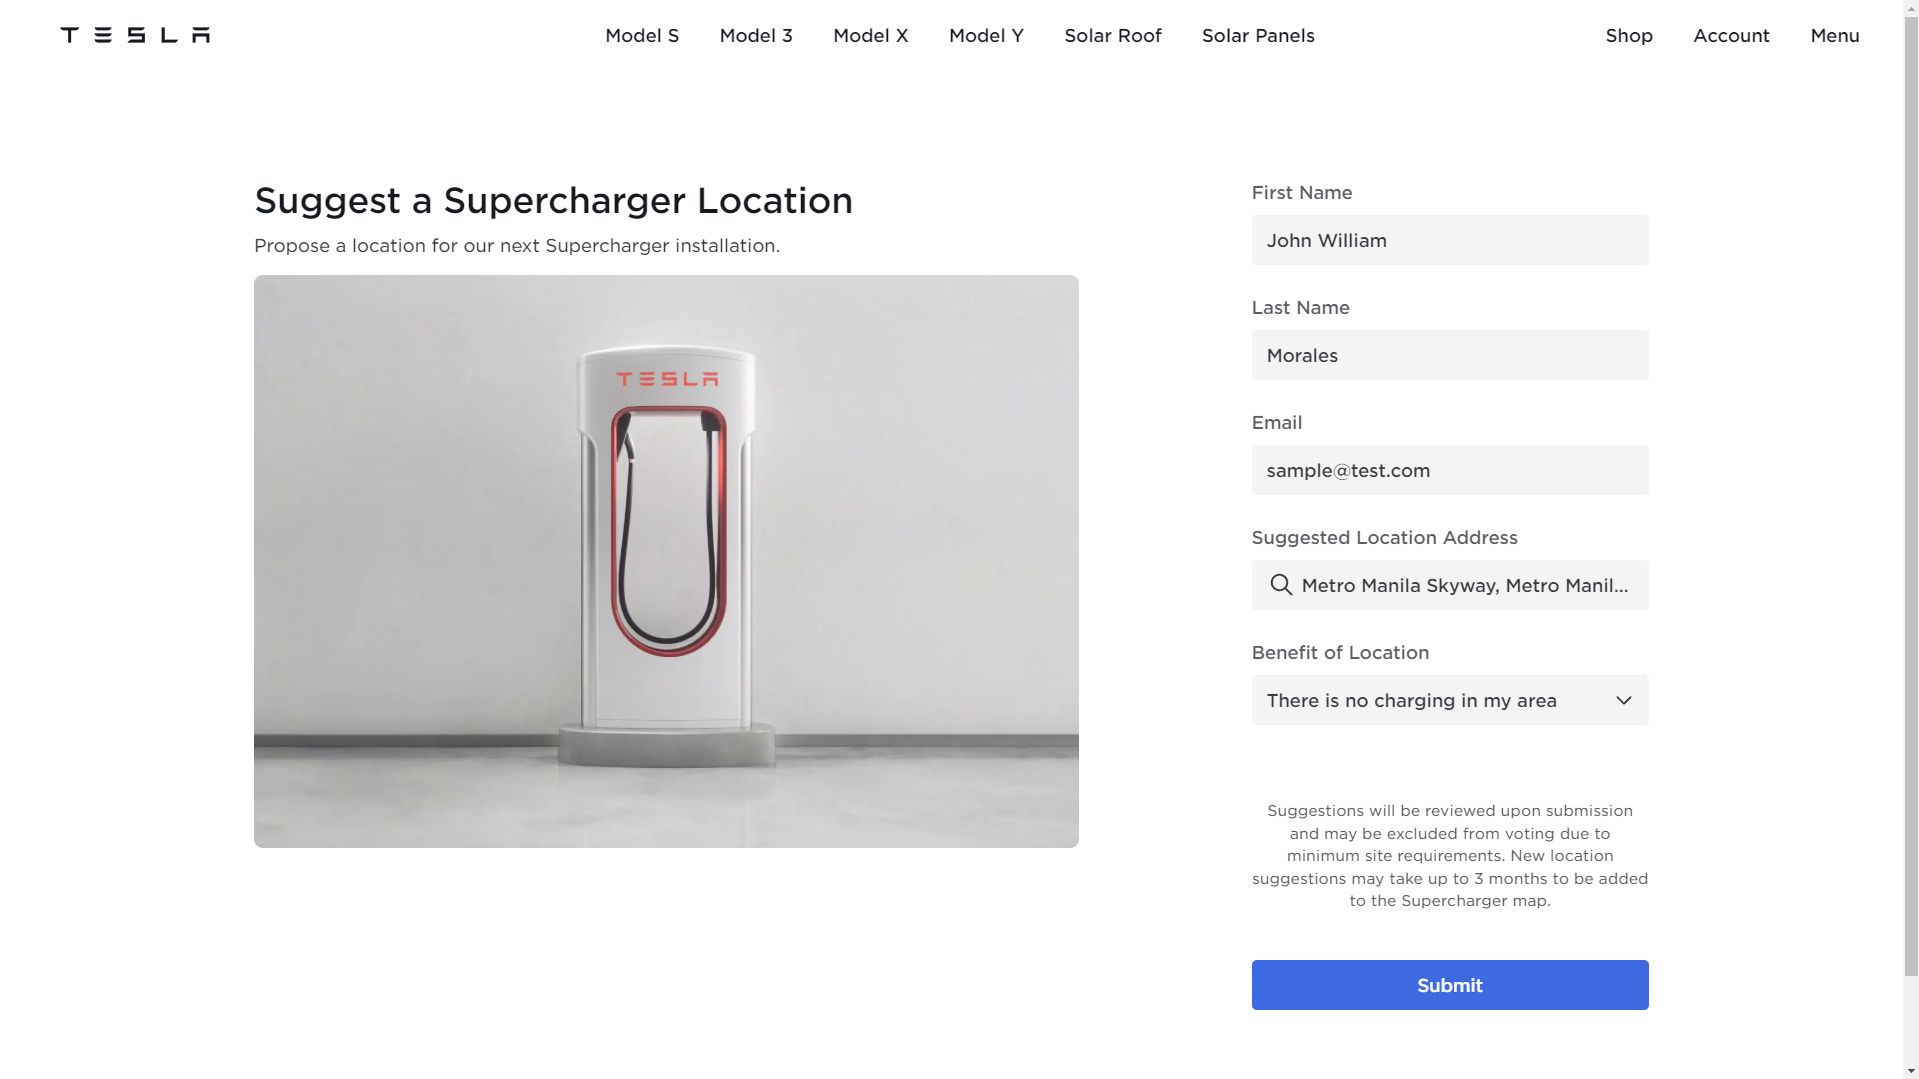 Suggest a Supercharger location